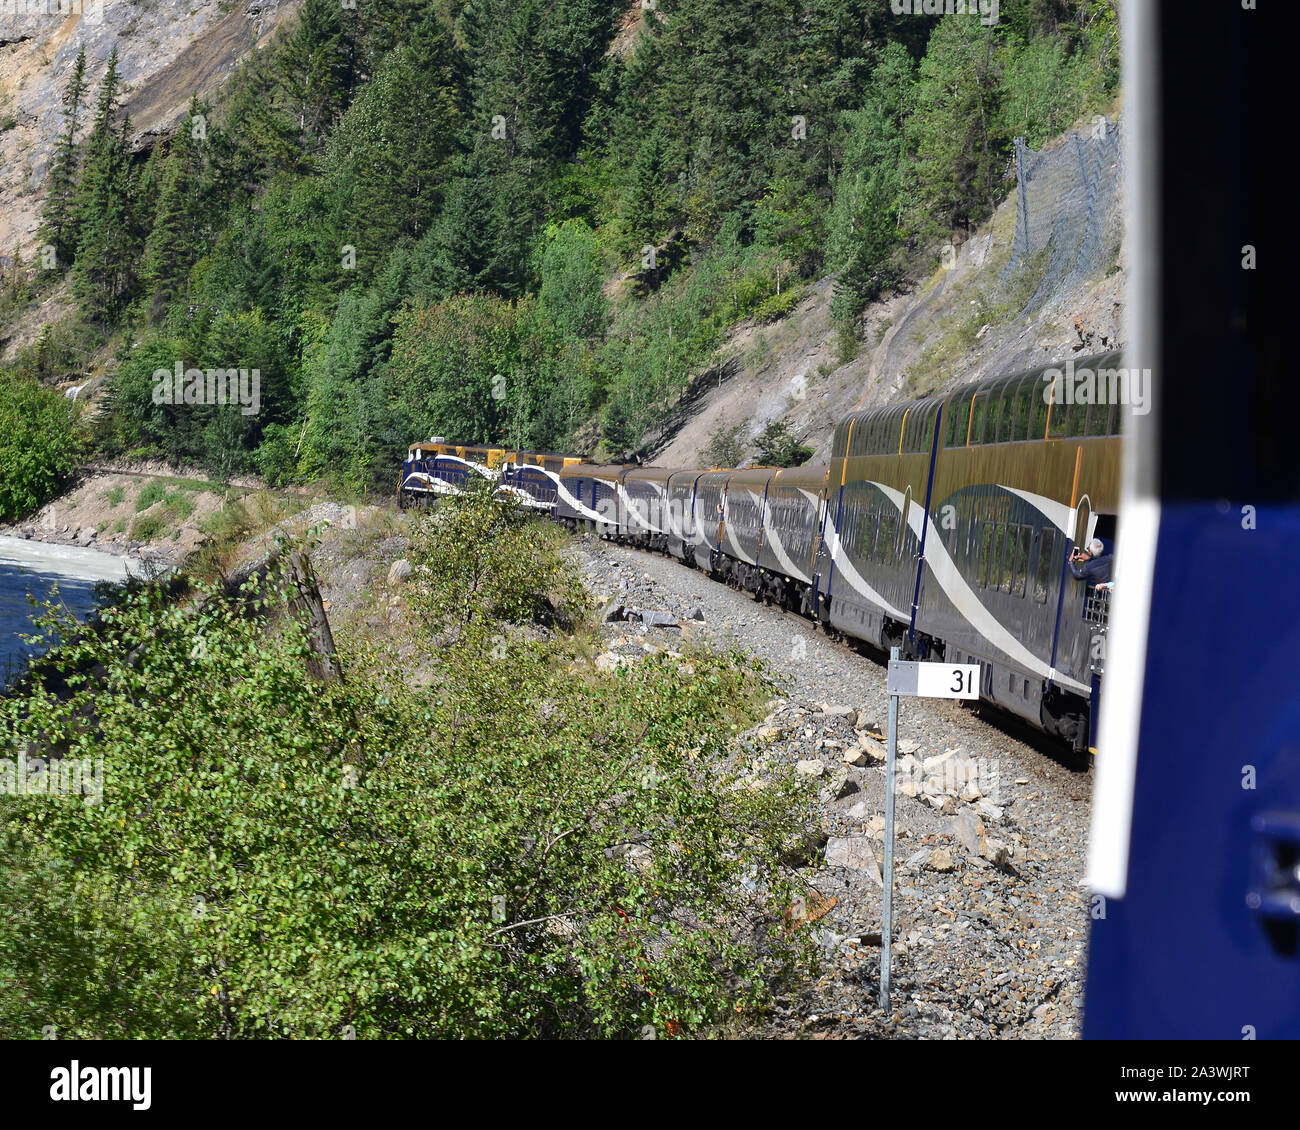 The Rocky Mountaineer rounding the curve, a good view of silver and gold class carriages. Stock Photo